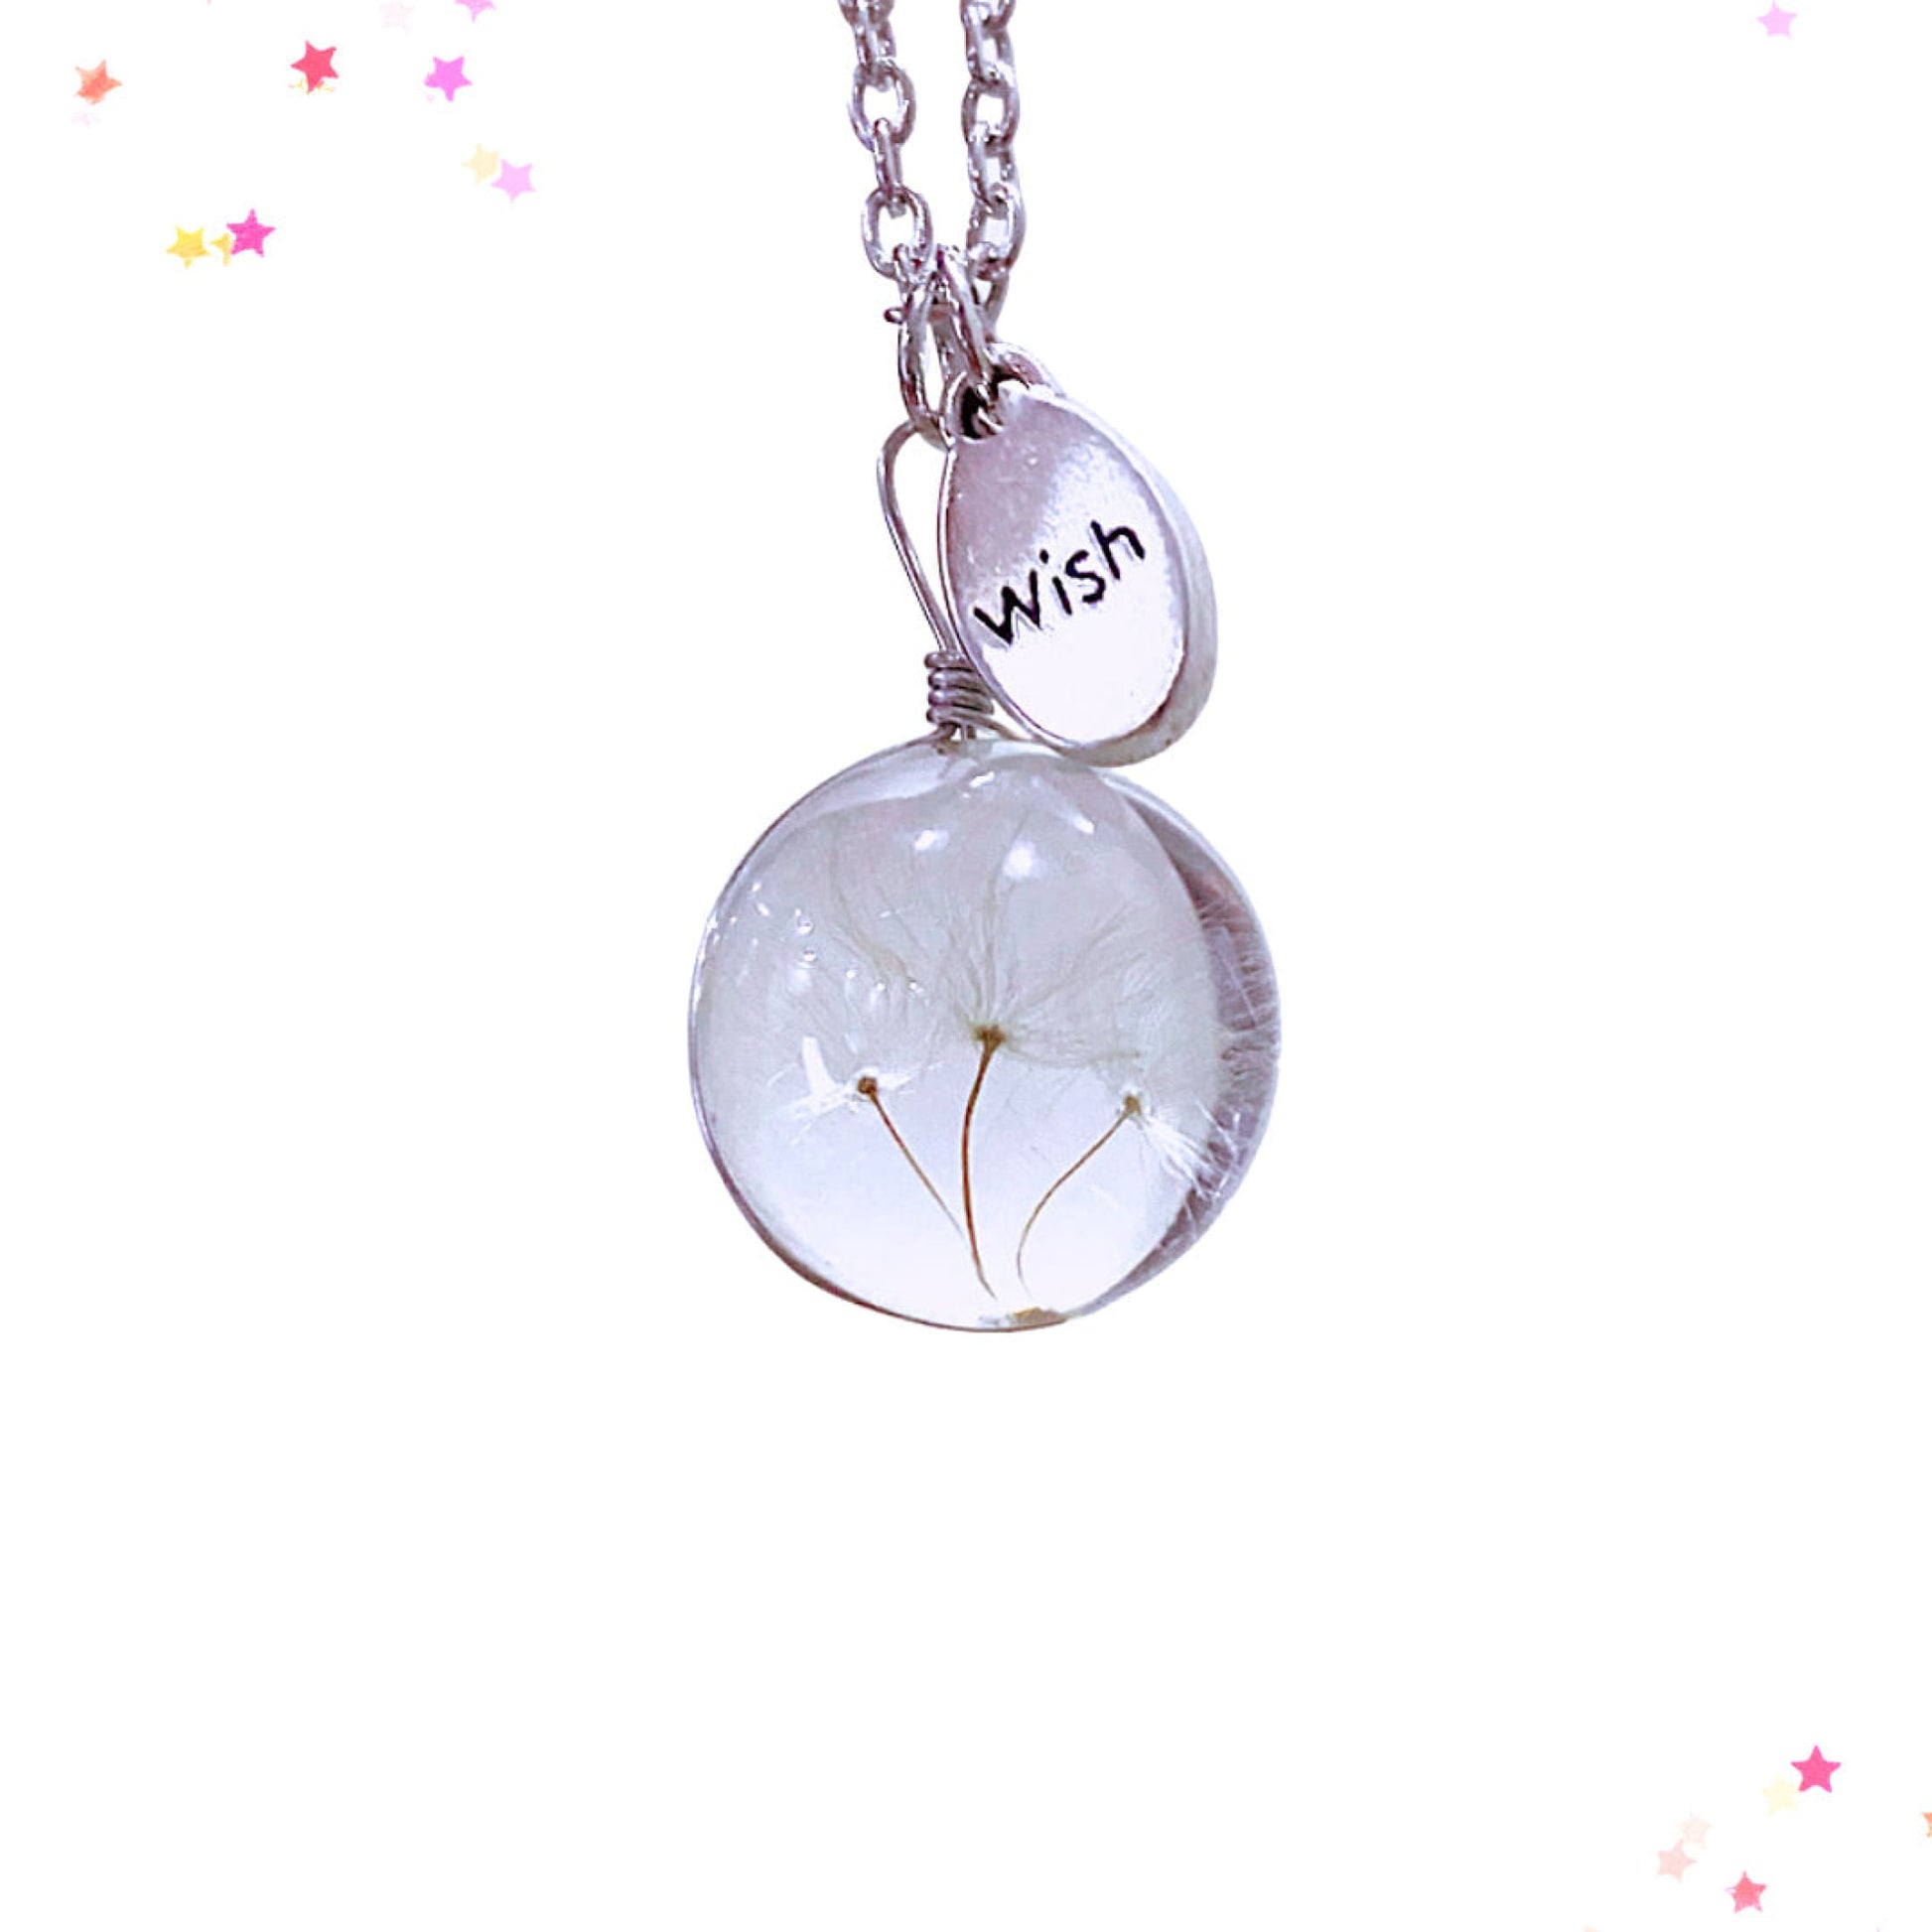 Dandelion Wish Necklace from Confetti Kitty, Only 12.99